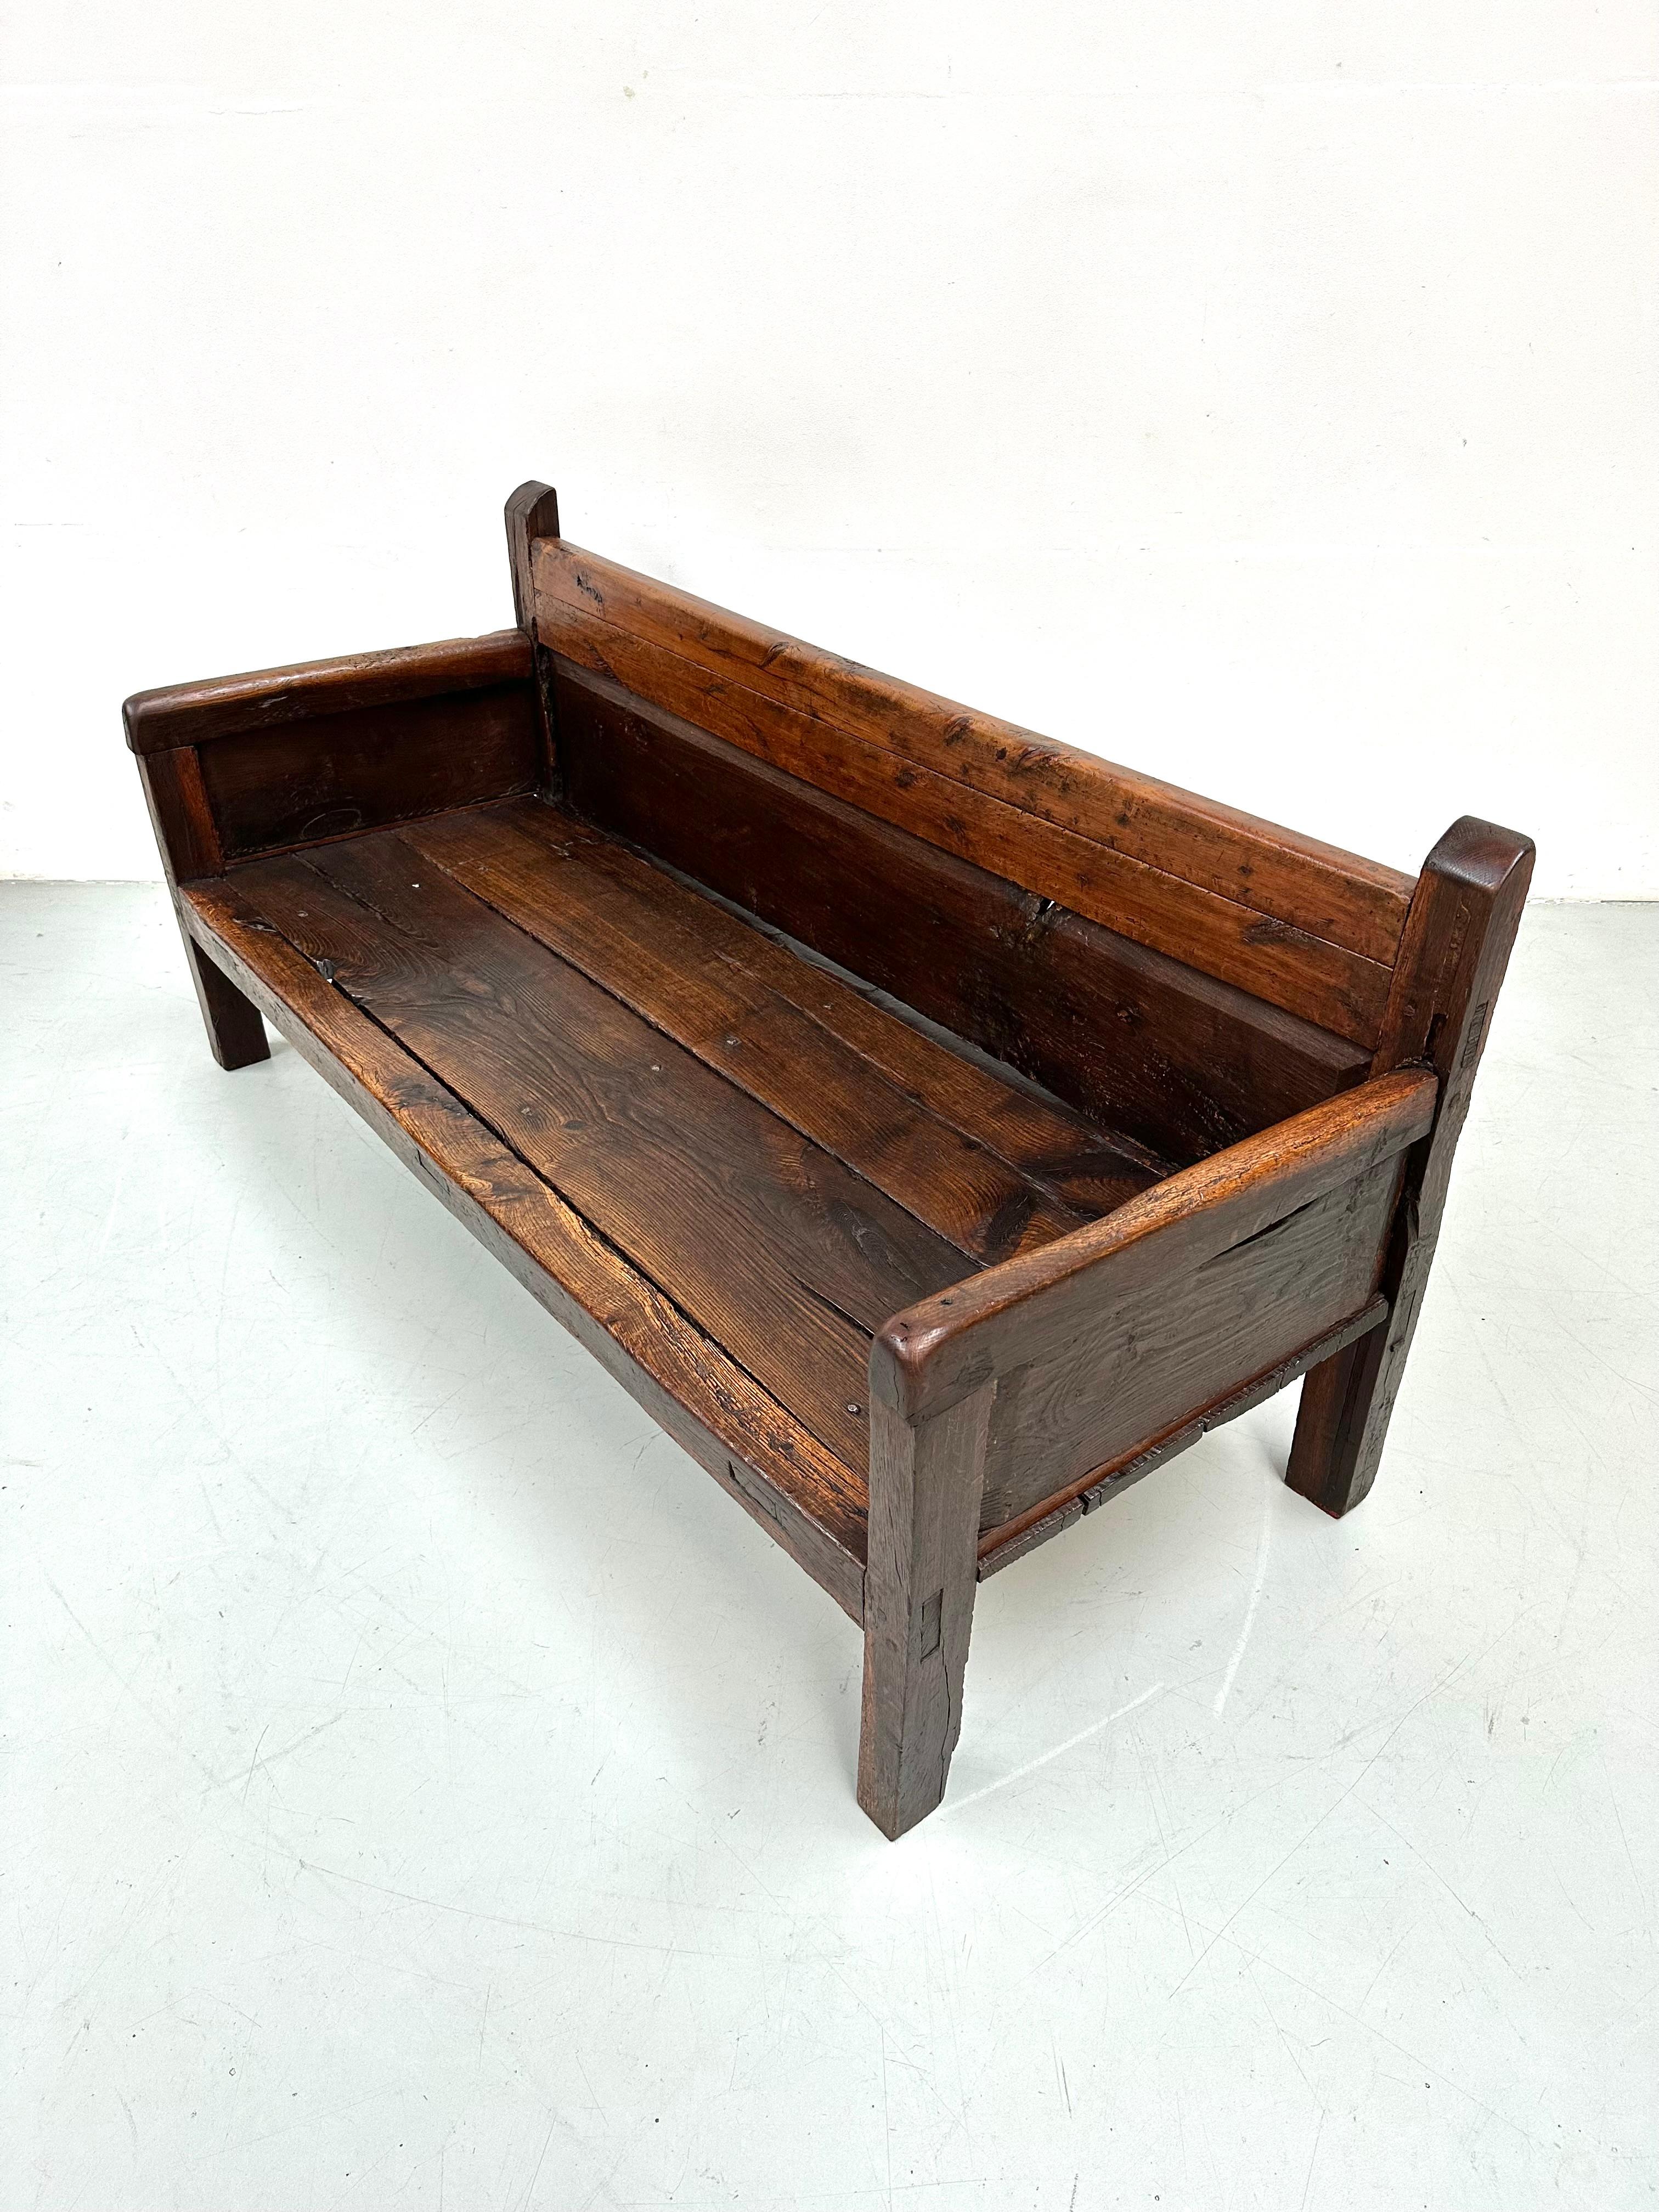 Antique Handmade Minimalistic Spanish Chestnut Wood Bench, Early 19th Century For Sale 3